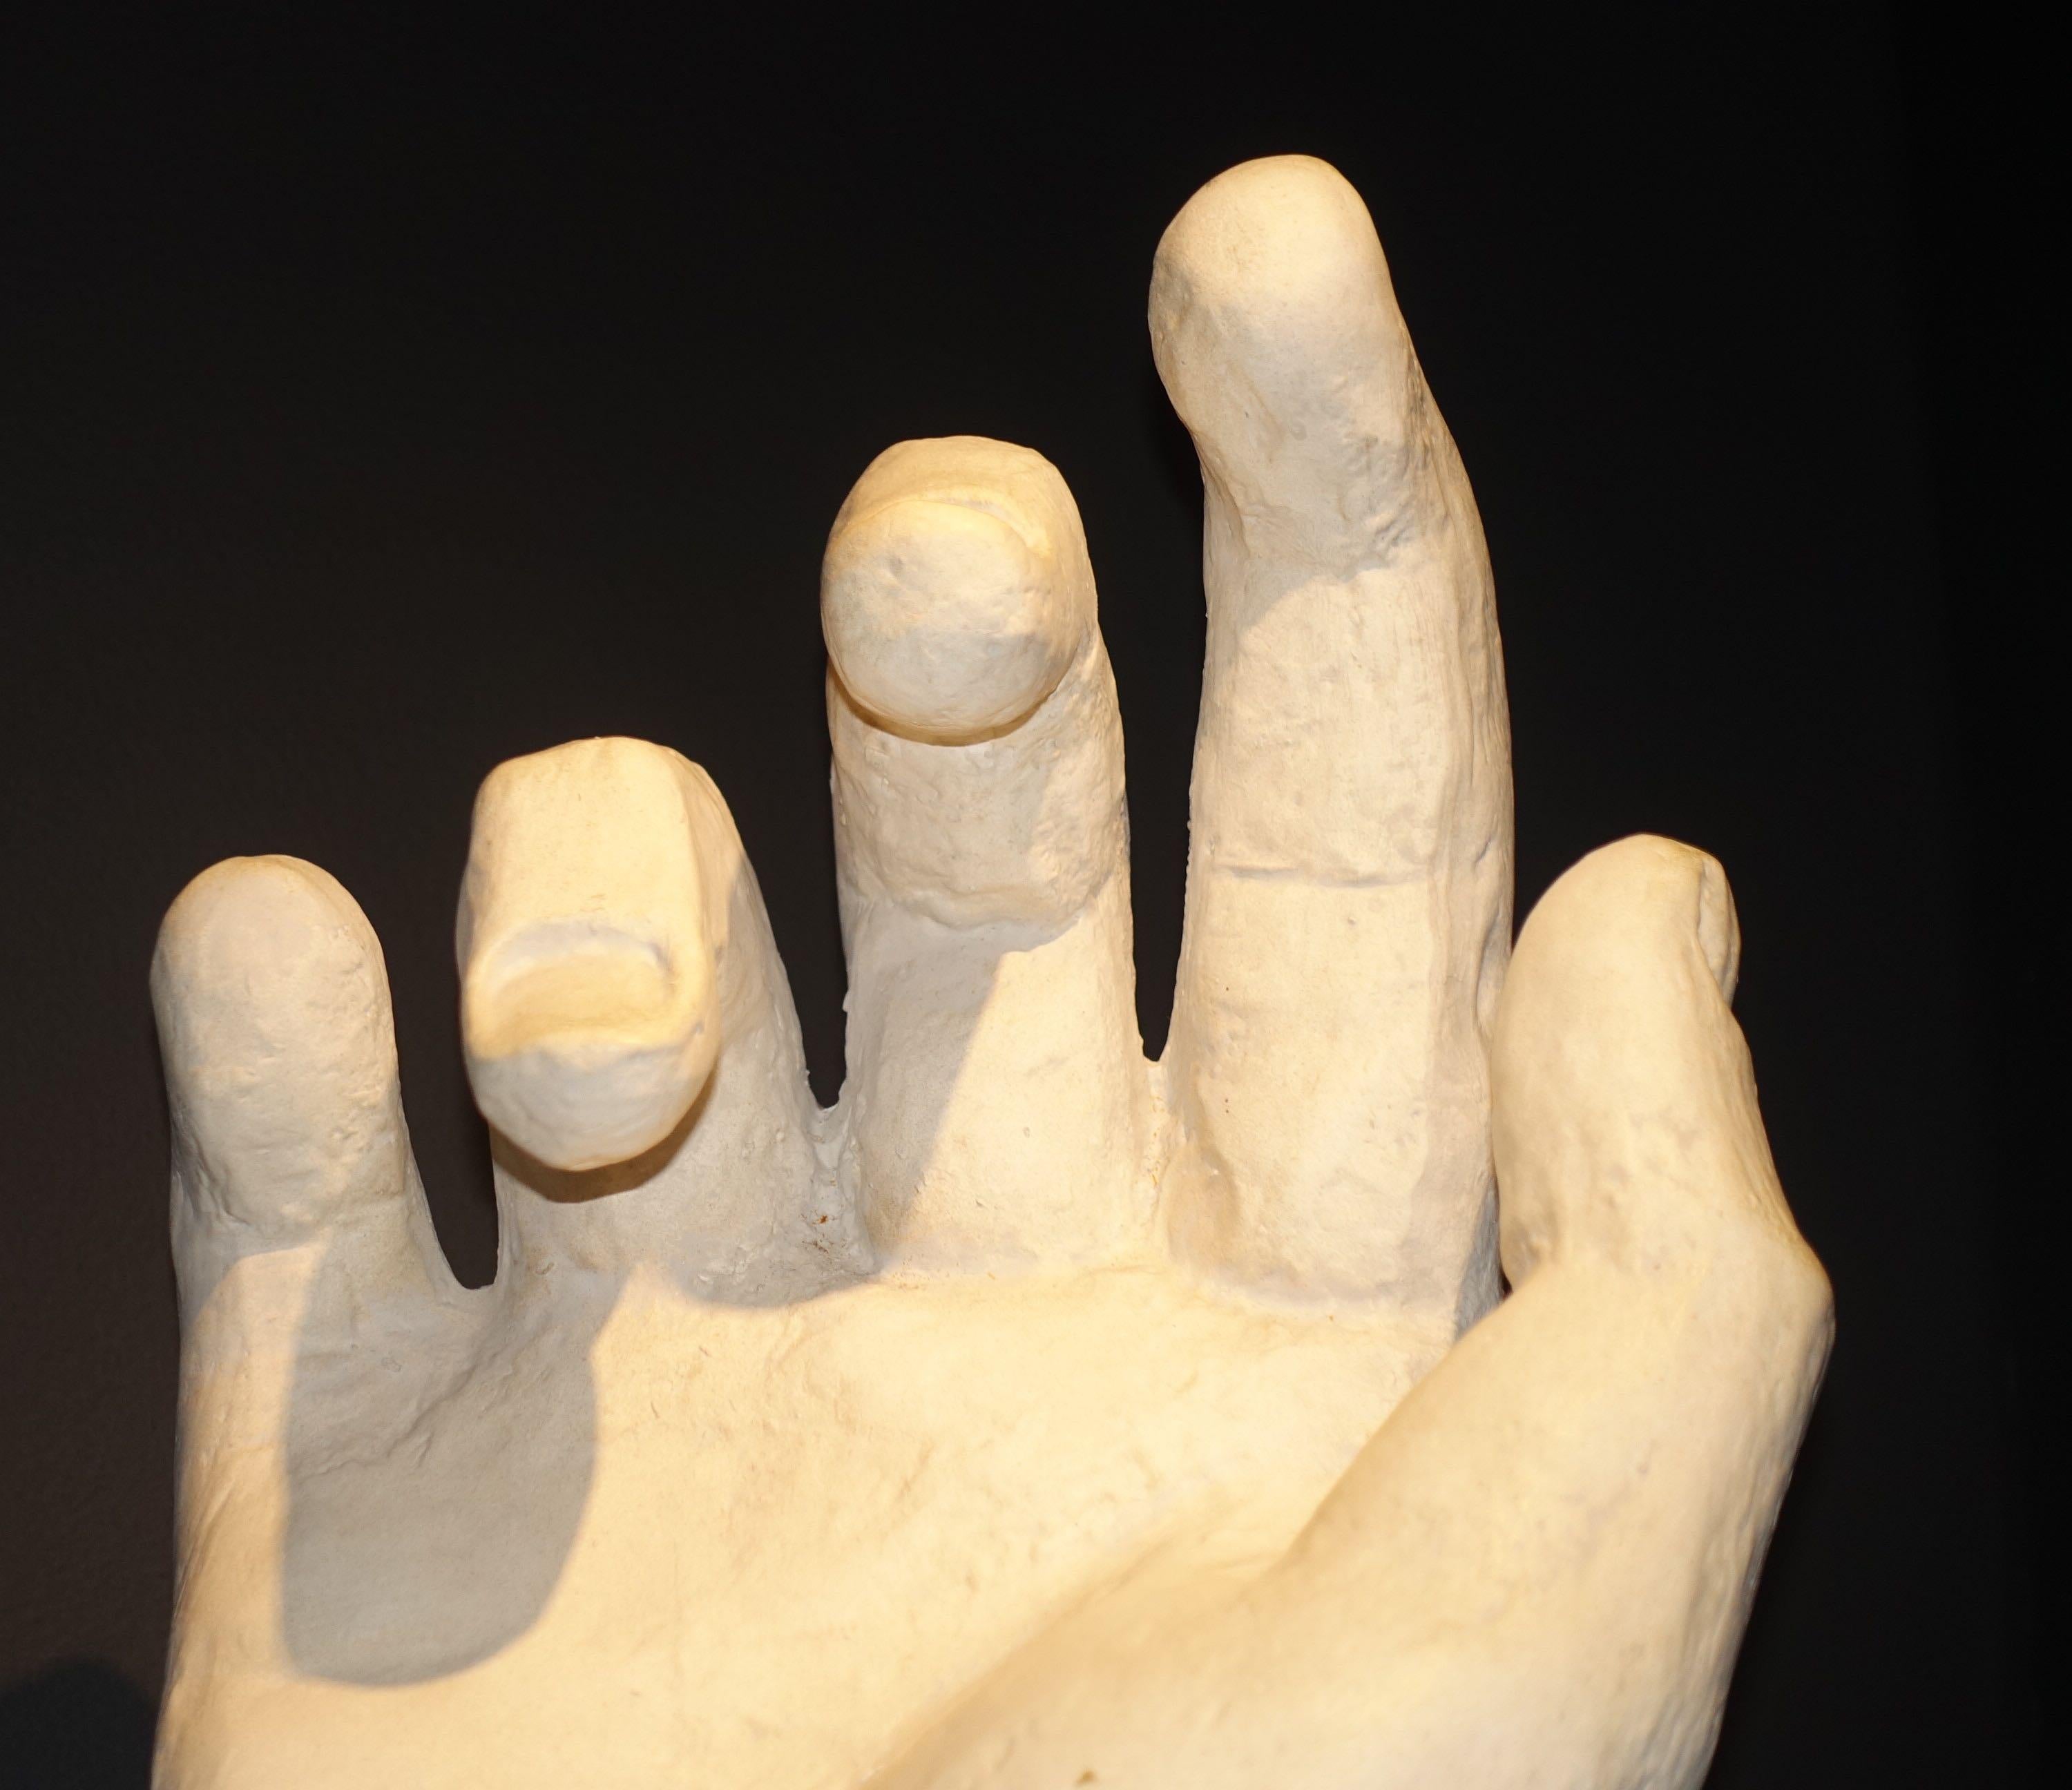 Contemporary French large white plaster hand.
Often used as artist model.